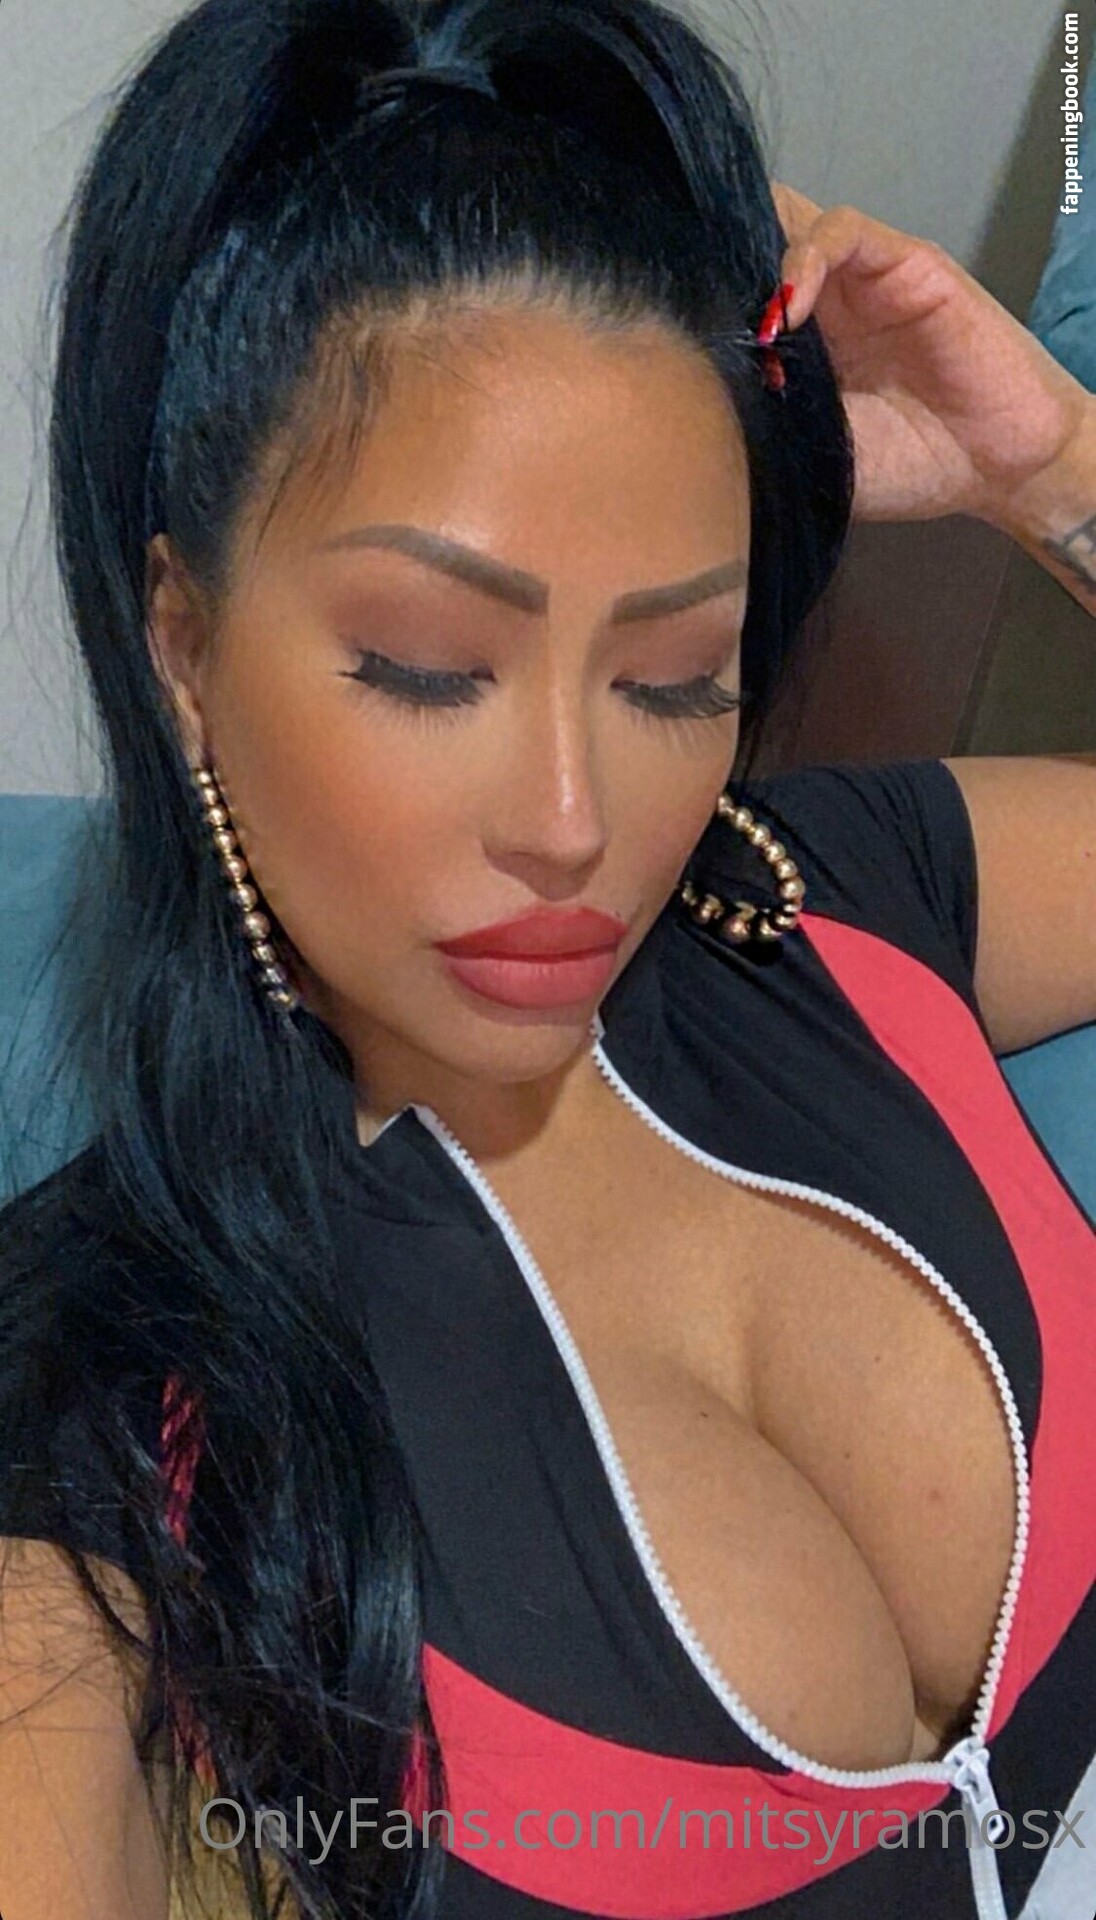 mitsyramosx Nude OnlyFans Leaks